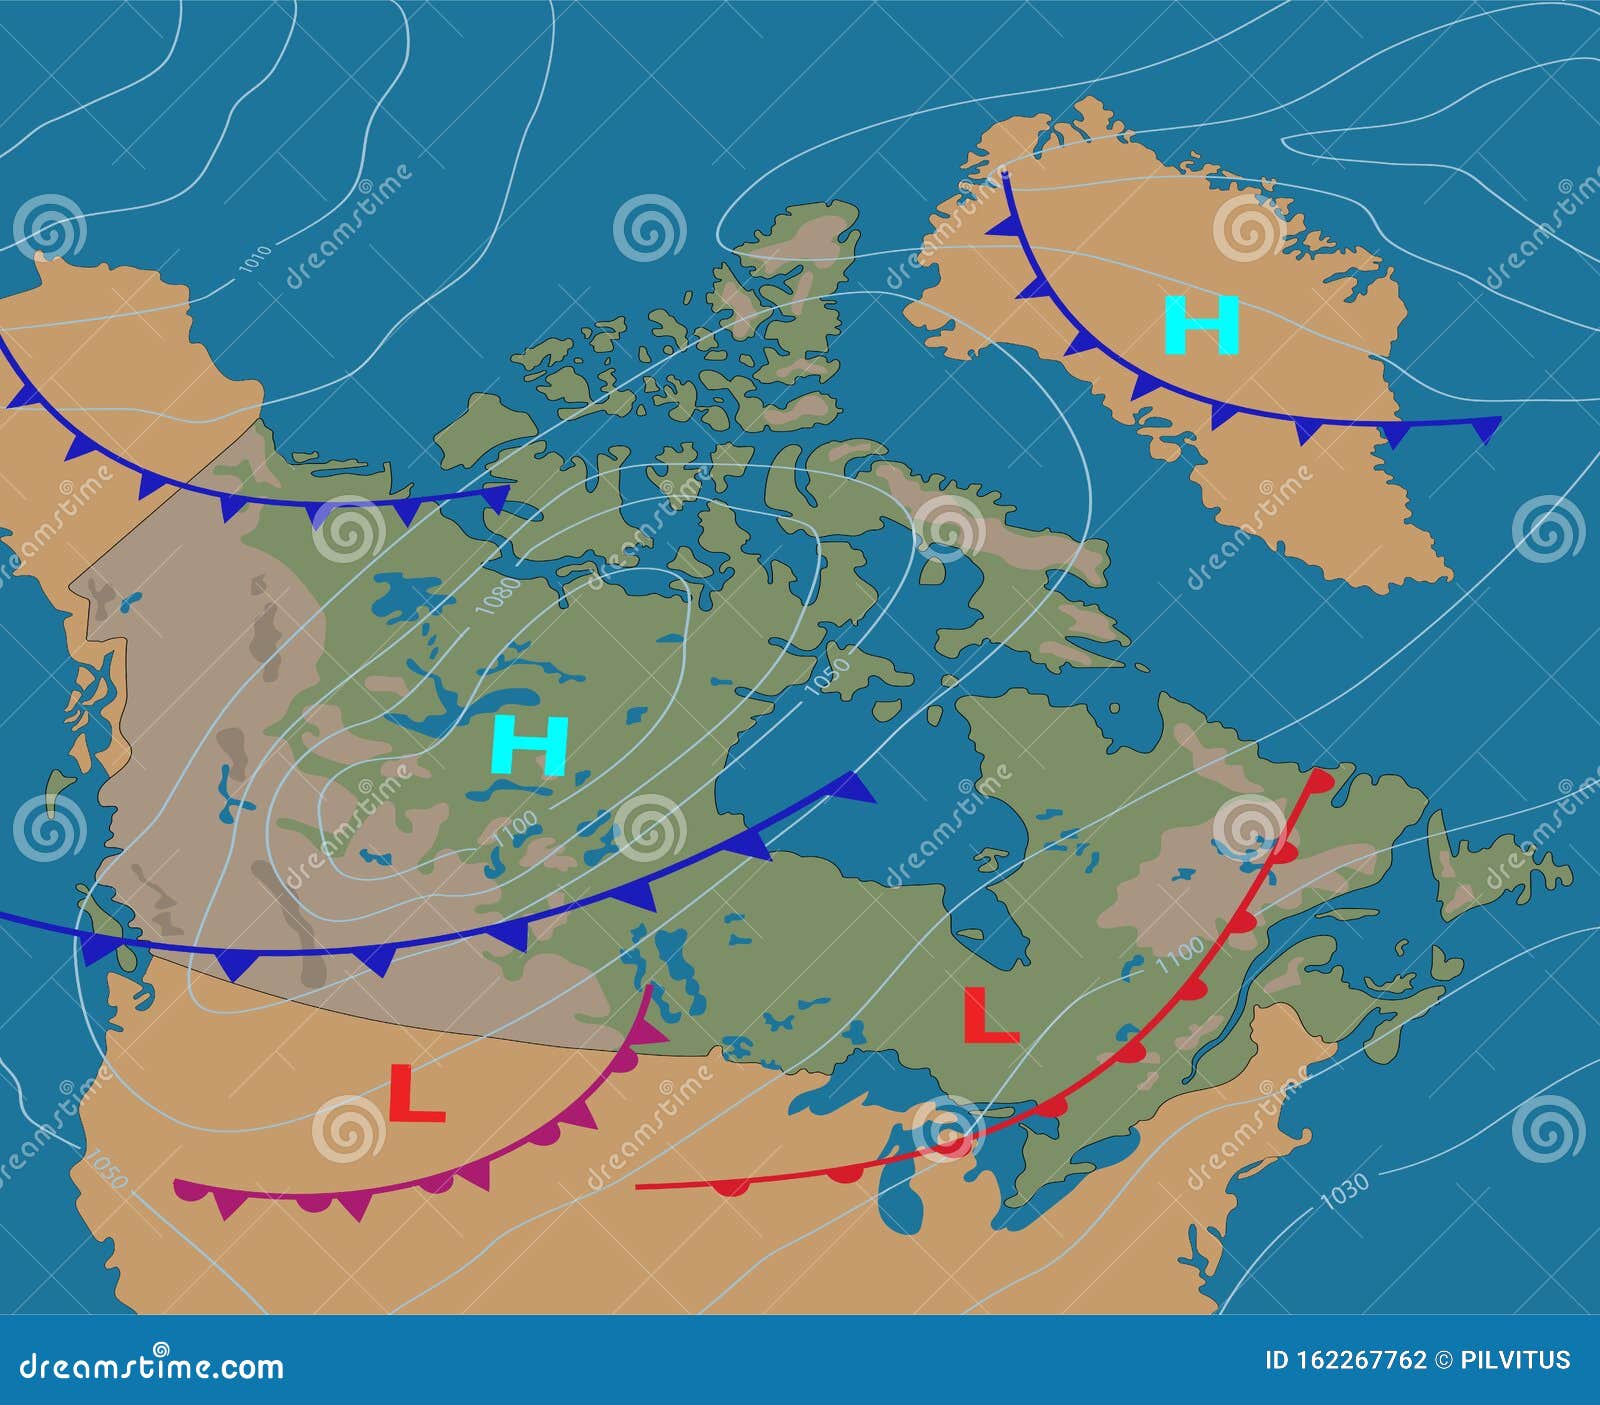 Weather Map of the Canada. Realistic Synoptic Map of the Country